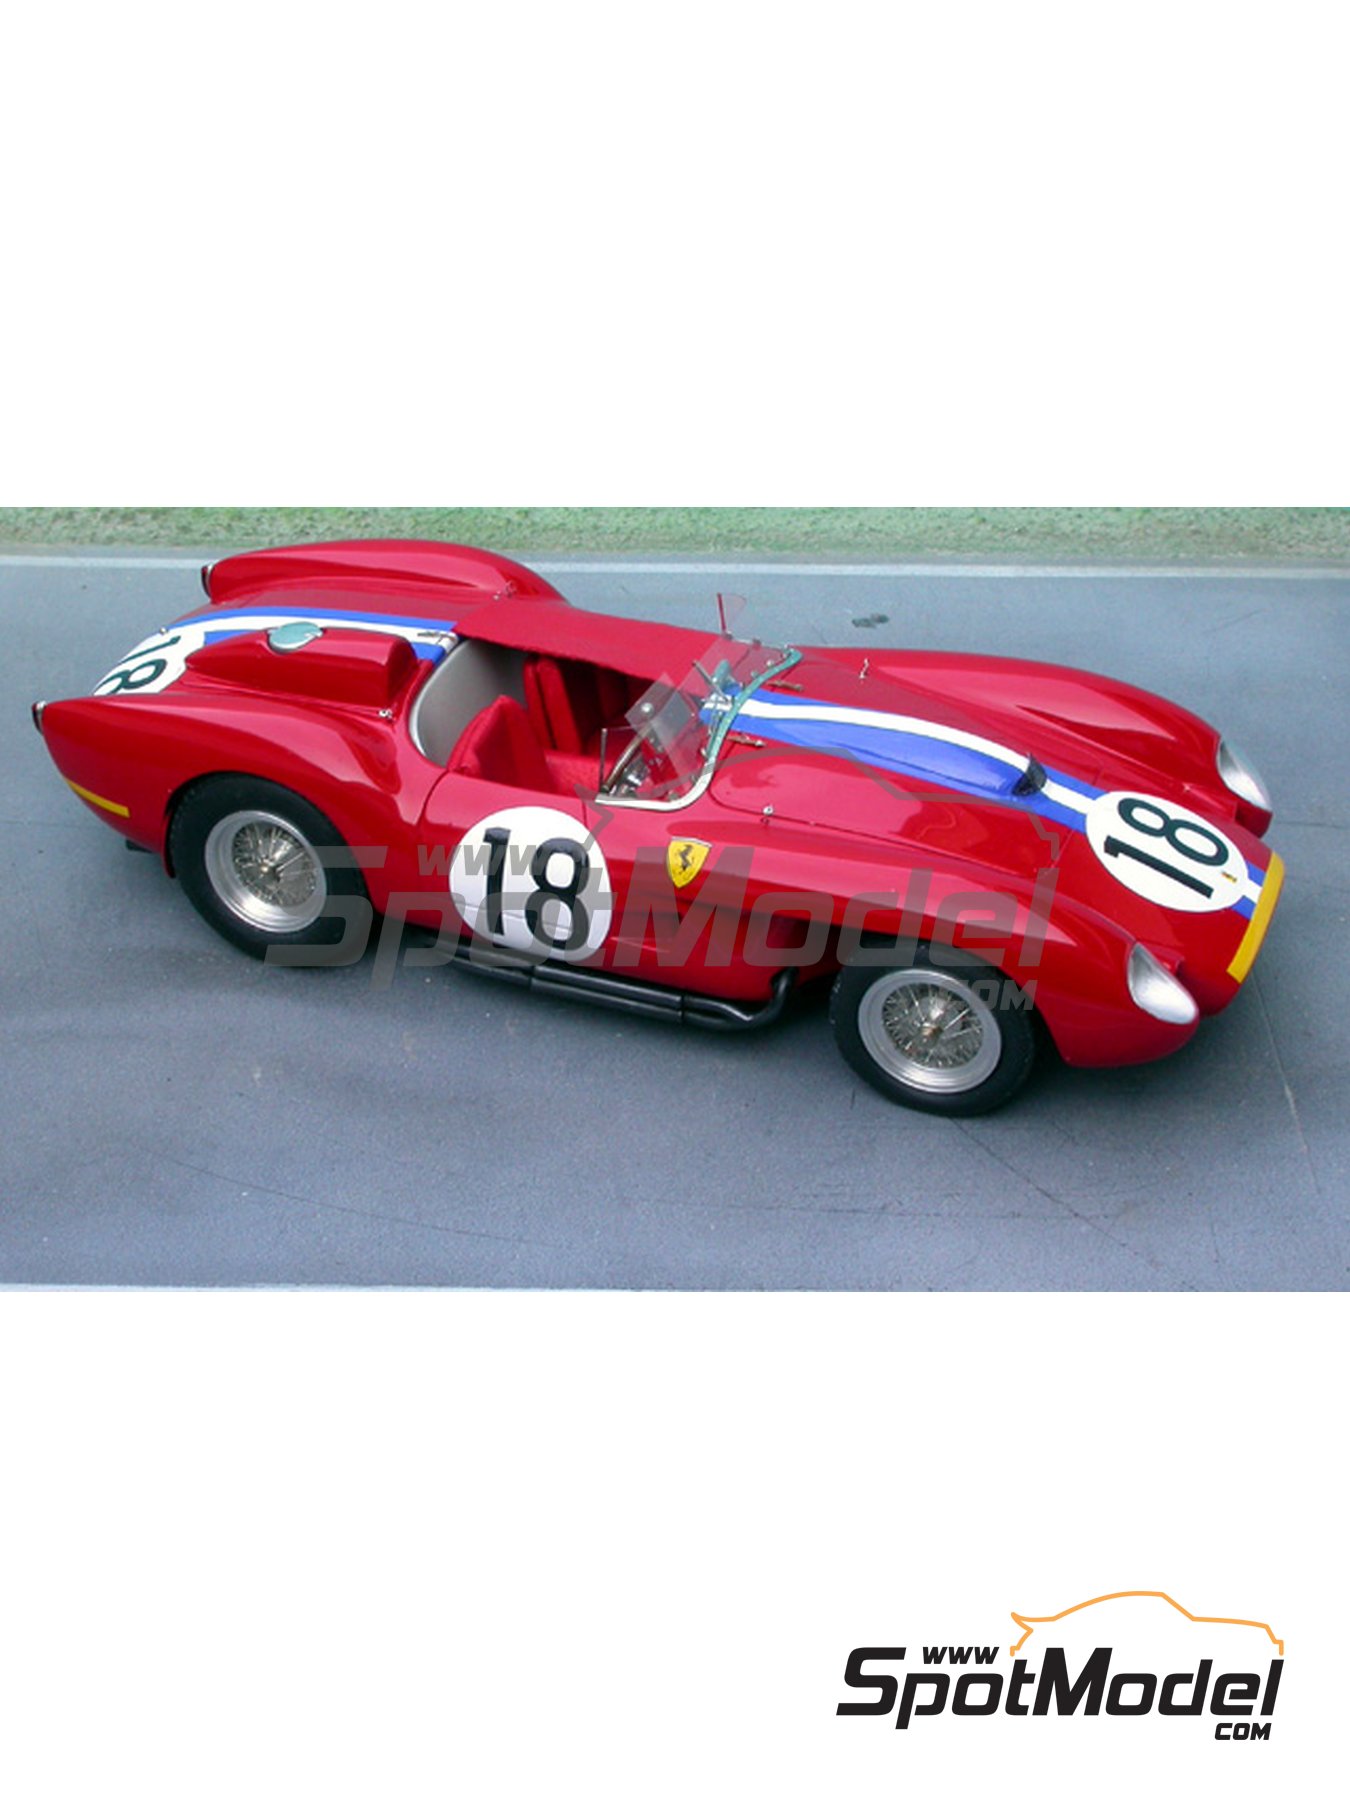 Ferrari 250 Testa Rossa TR 57 0666 - 24 Hours Le Mans 1958. Model car kit  in 1/24 scale manufactured by Renaissance Models (ref. 24-17, also 24/17)